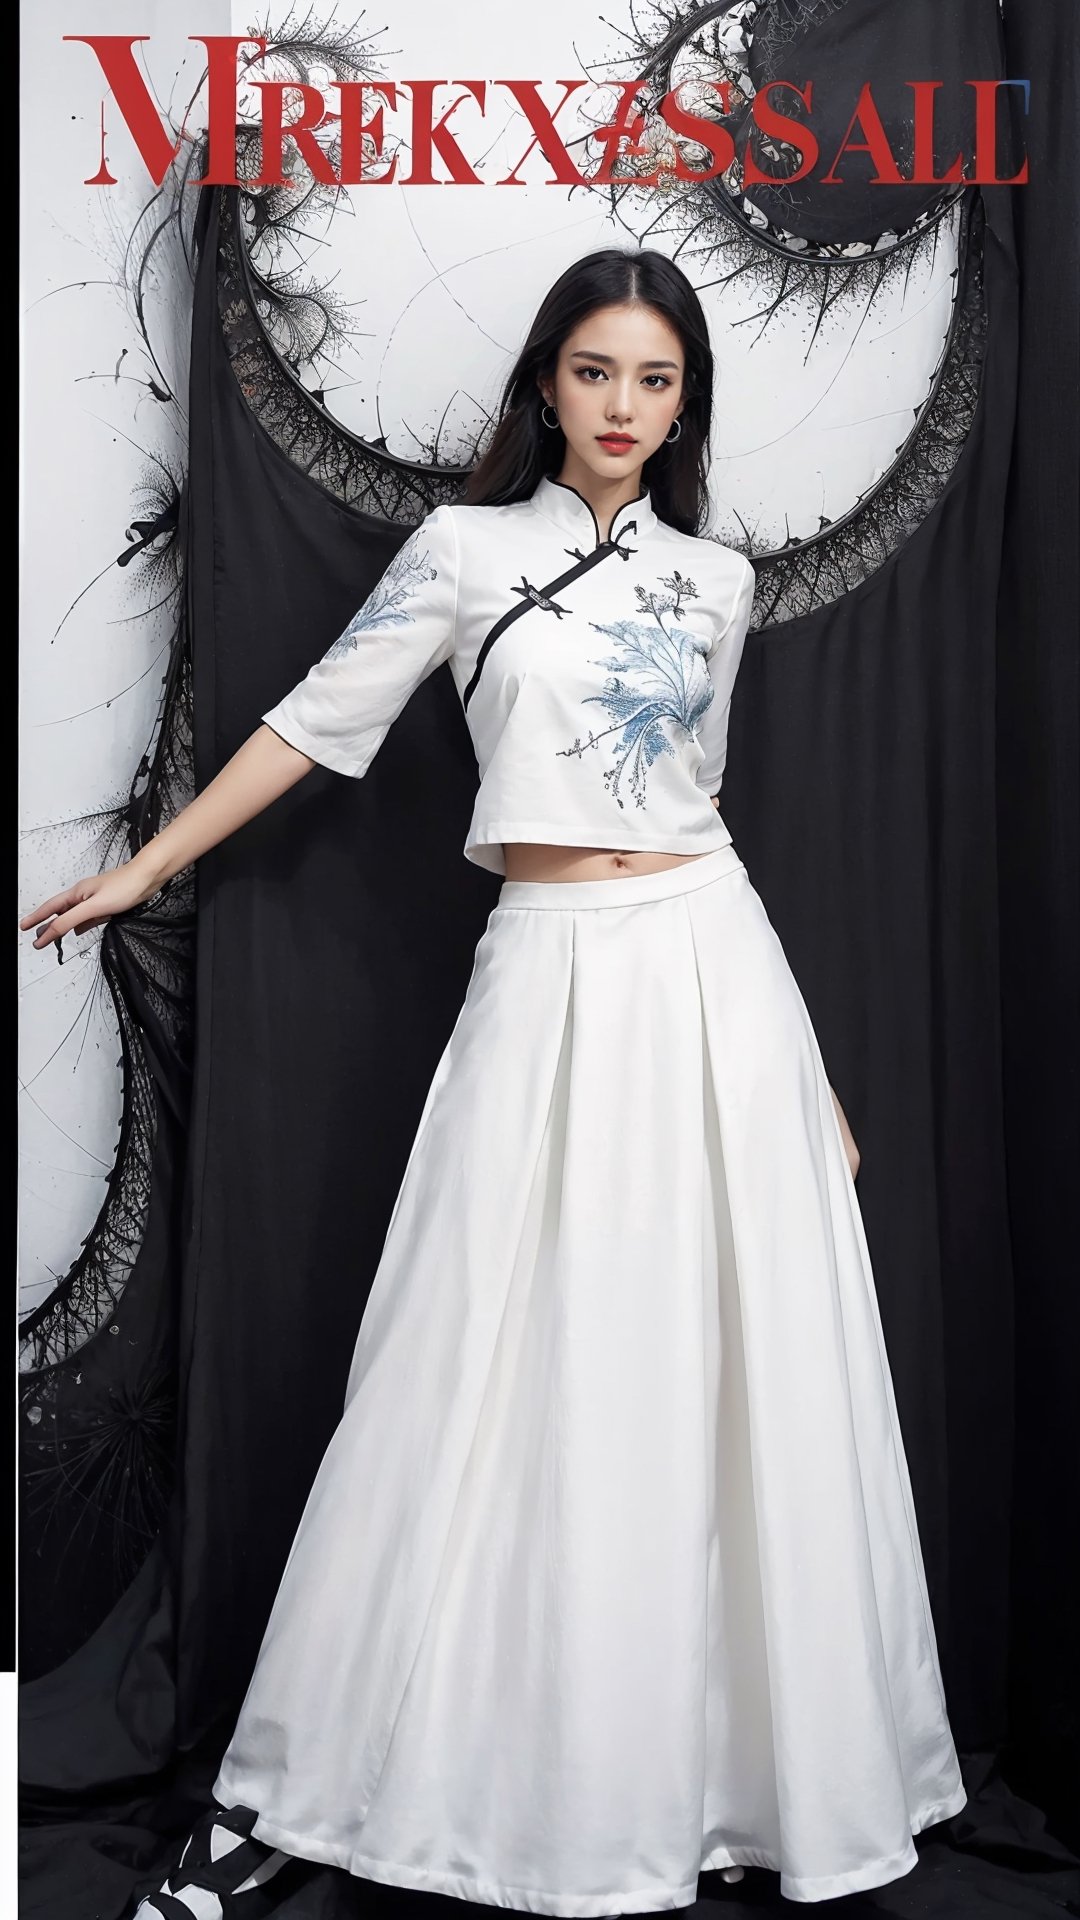 extreme detailed, (masterpiece), (top quality), (best quality), (official art), (beautiful and aesthetic:1.2), (stylish pose), (1 woman), (fractal art:1.3), (colorful), (black-milkywhite theme: 1.2), ppcp,long skirt,perfect,ChineseWatercolorPainting, magazine cover,